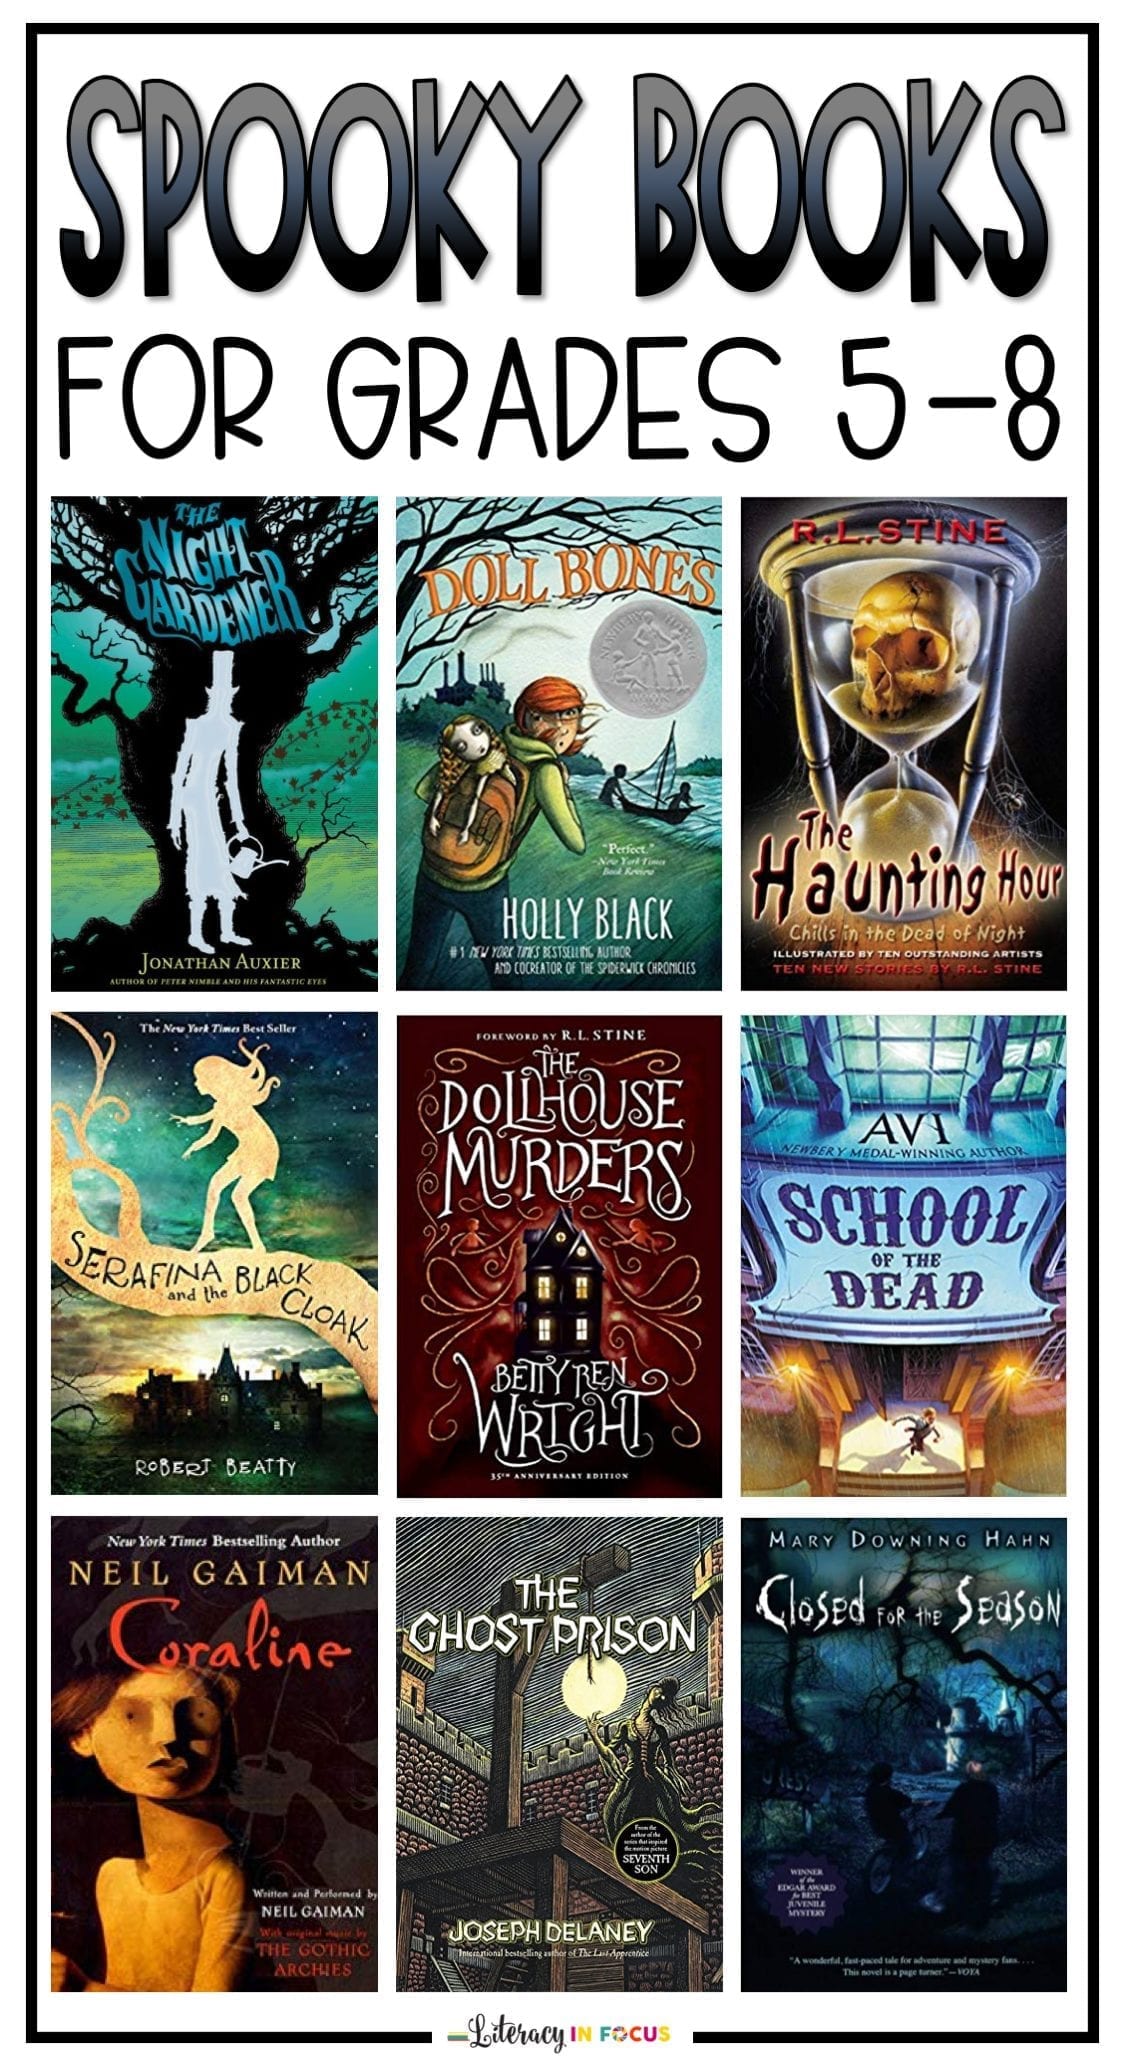 Spooky Books for Upper Elementary and Middle School